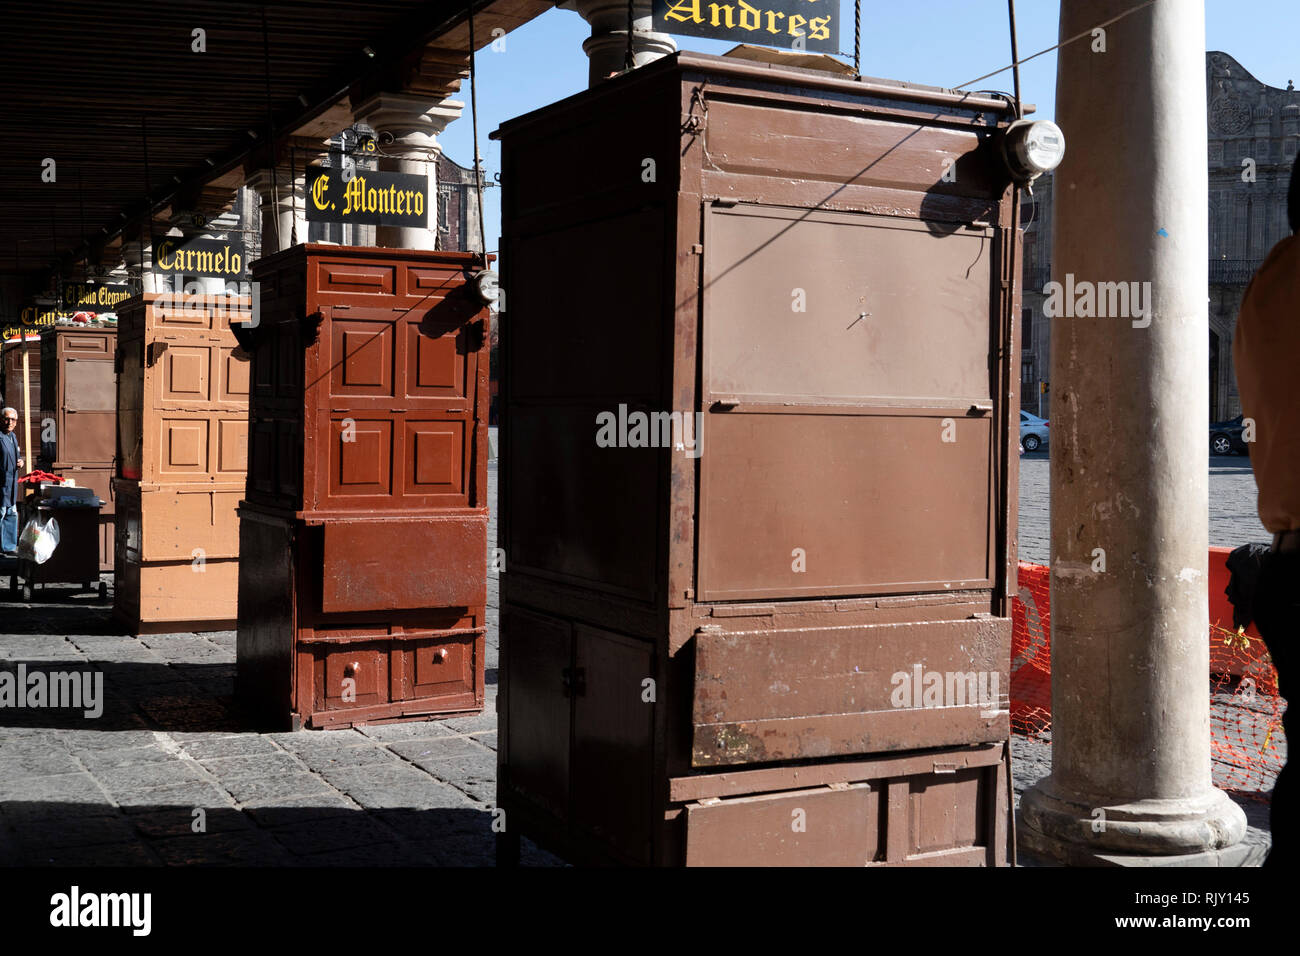 MEXICO CITY, MEXICO - JANUARY 30 2019 - Santo Domingo Place. Scribes with typewriters and antique printing machines work in this Portal offering their Stock Photo